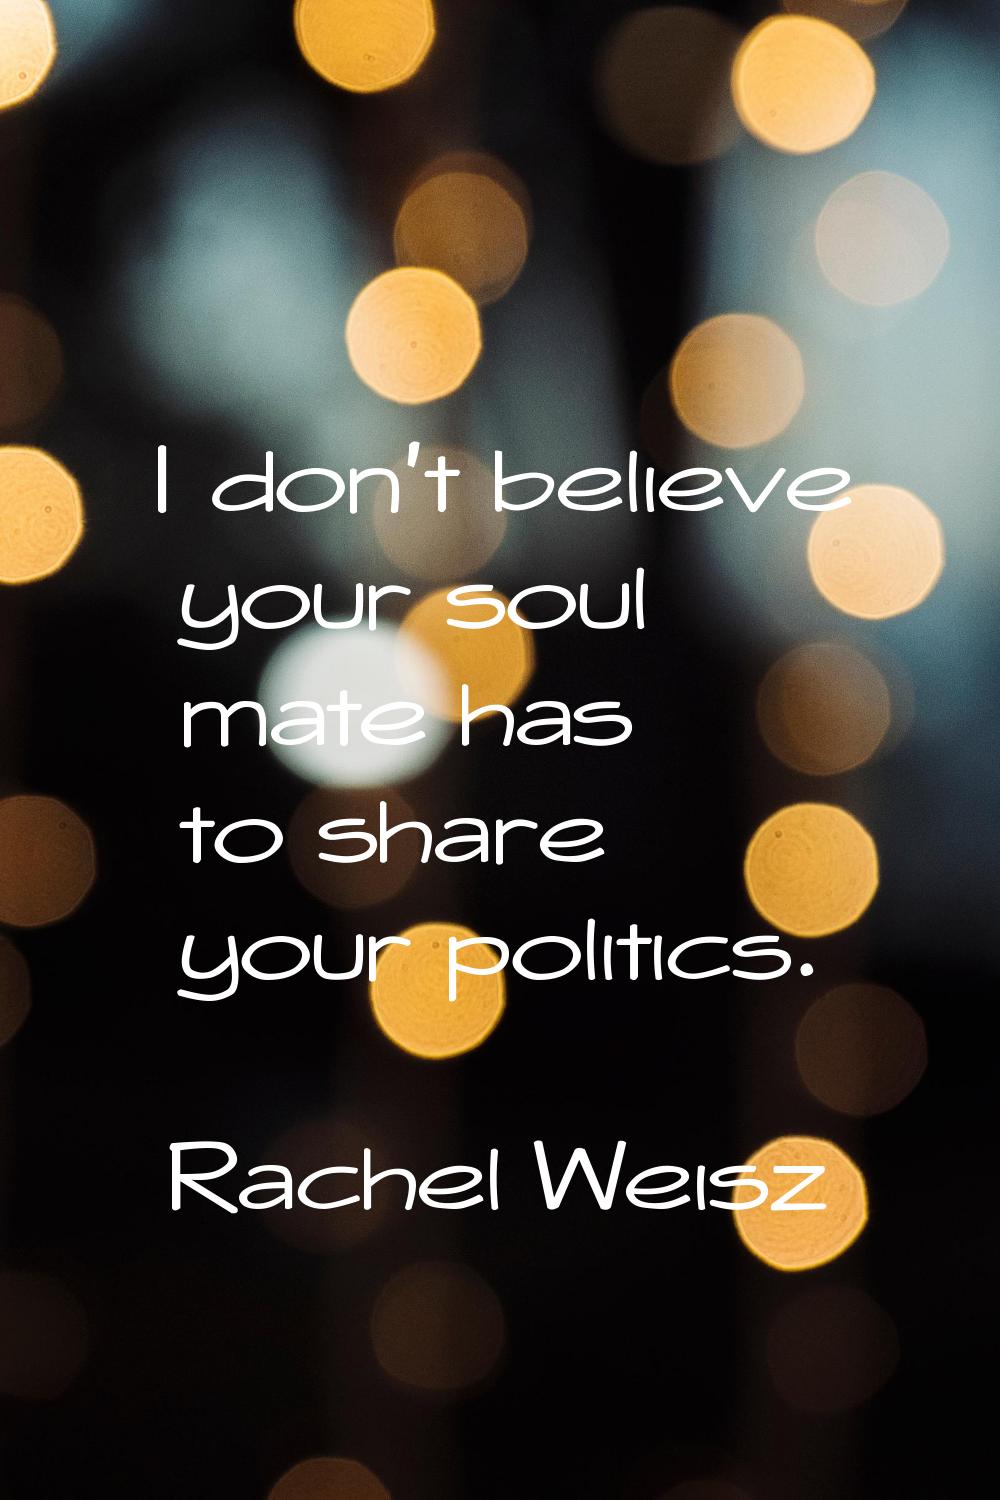 I don't believe your soul mate has to share your politics.